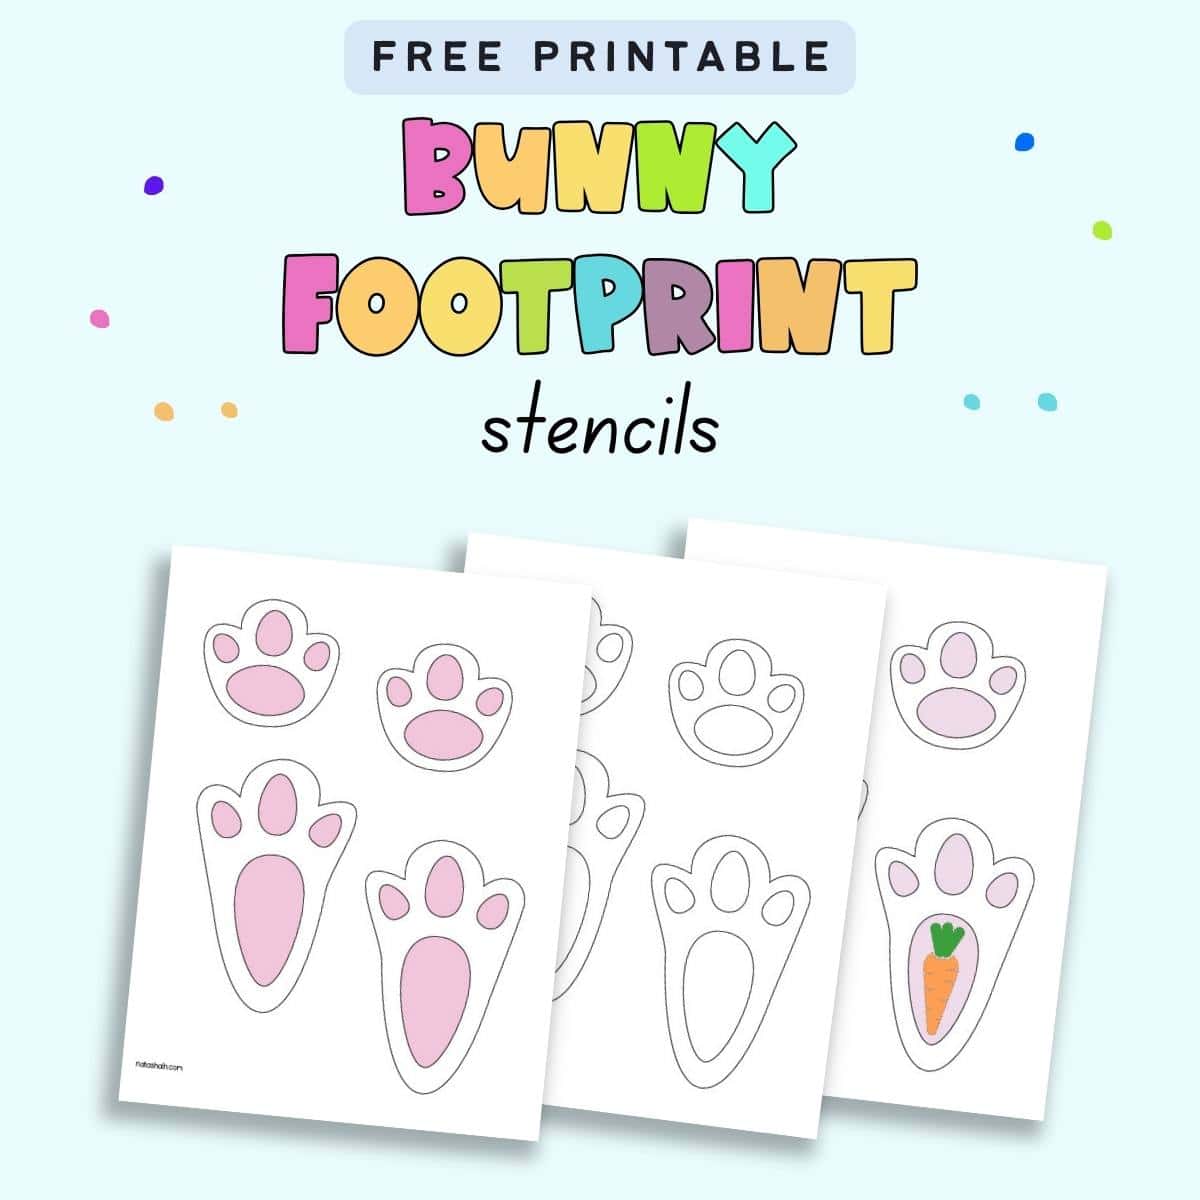 Text "free printable bunny footprint stencils" with a preview of three Easter bunny footprint stencils